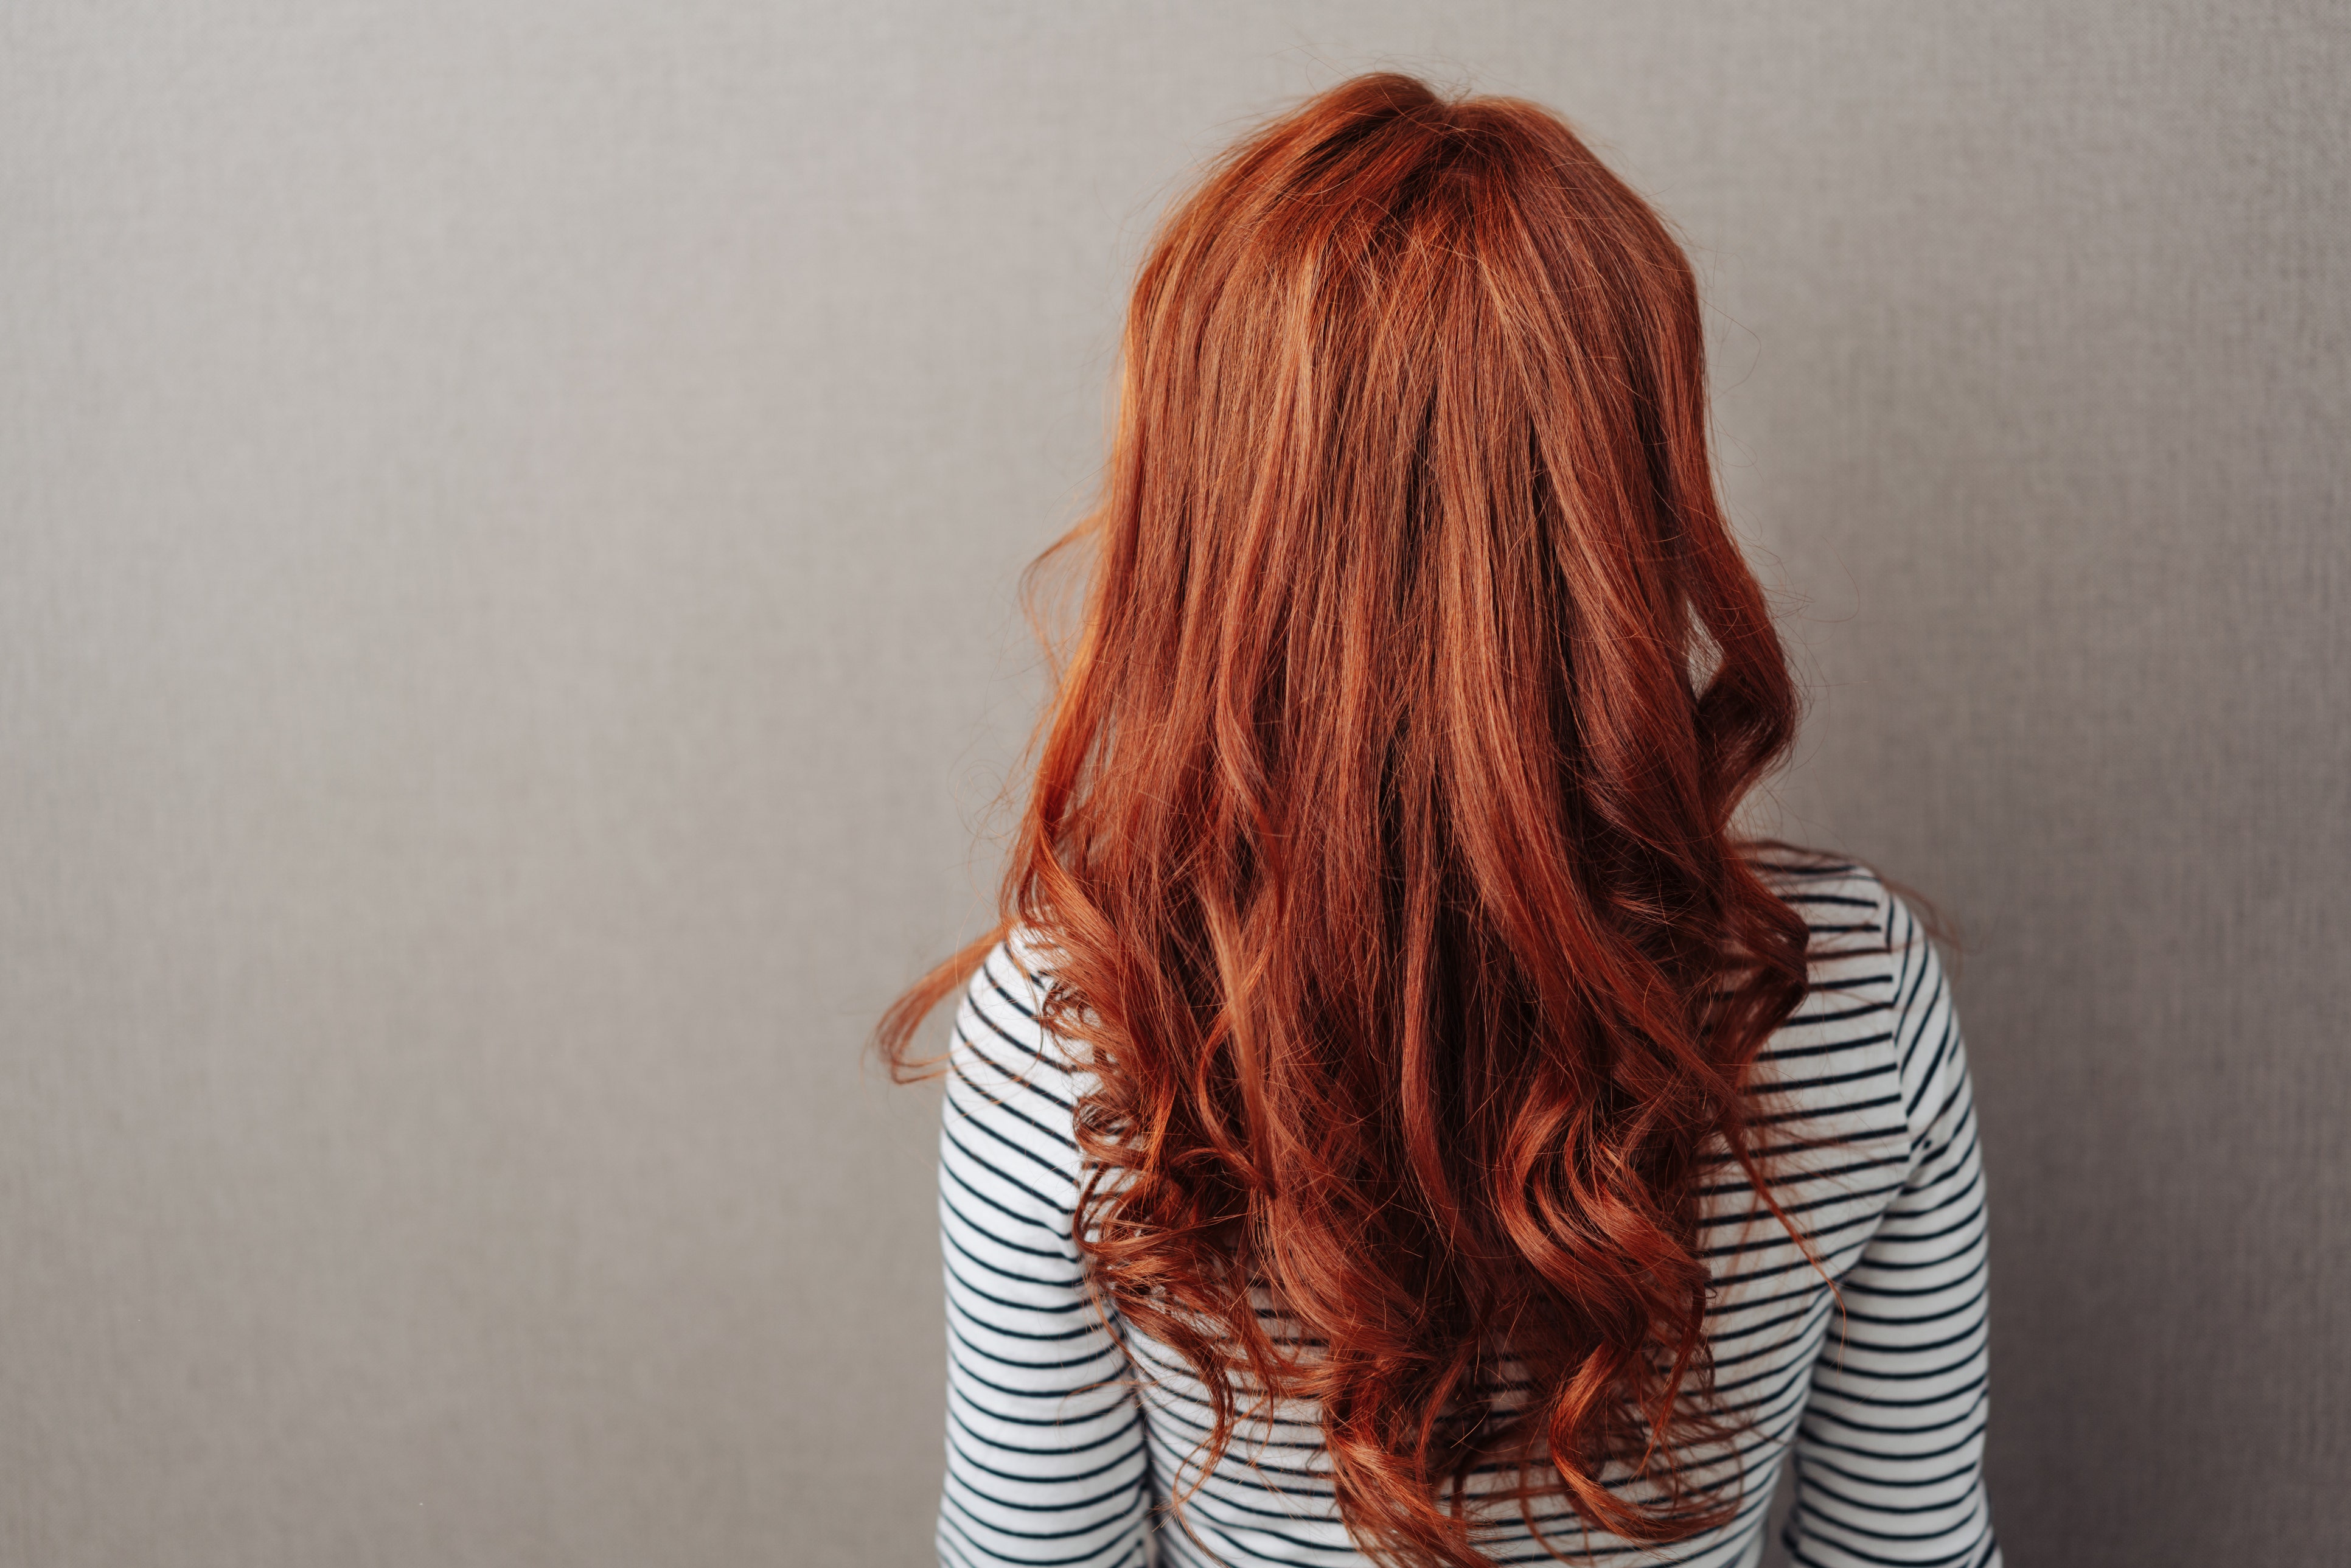 According to scientists, redheads feel less pain